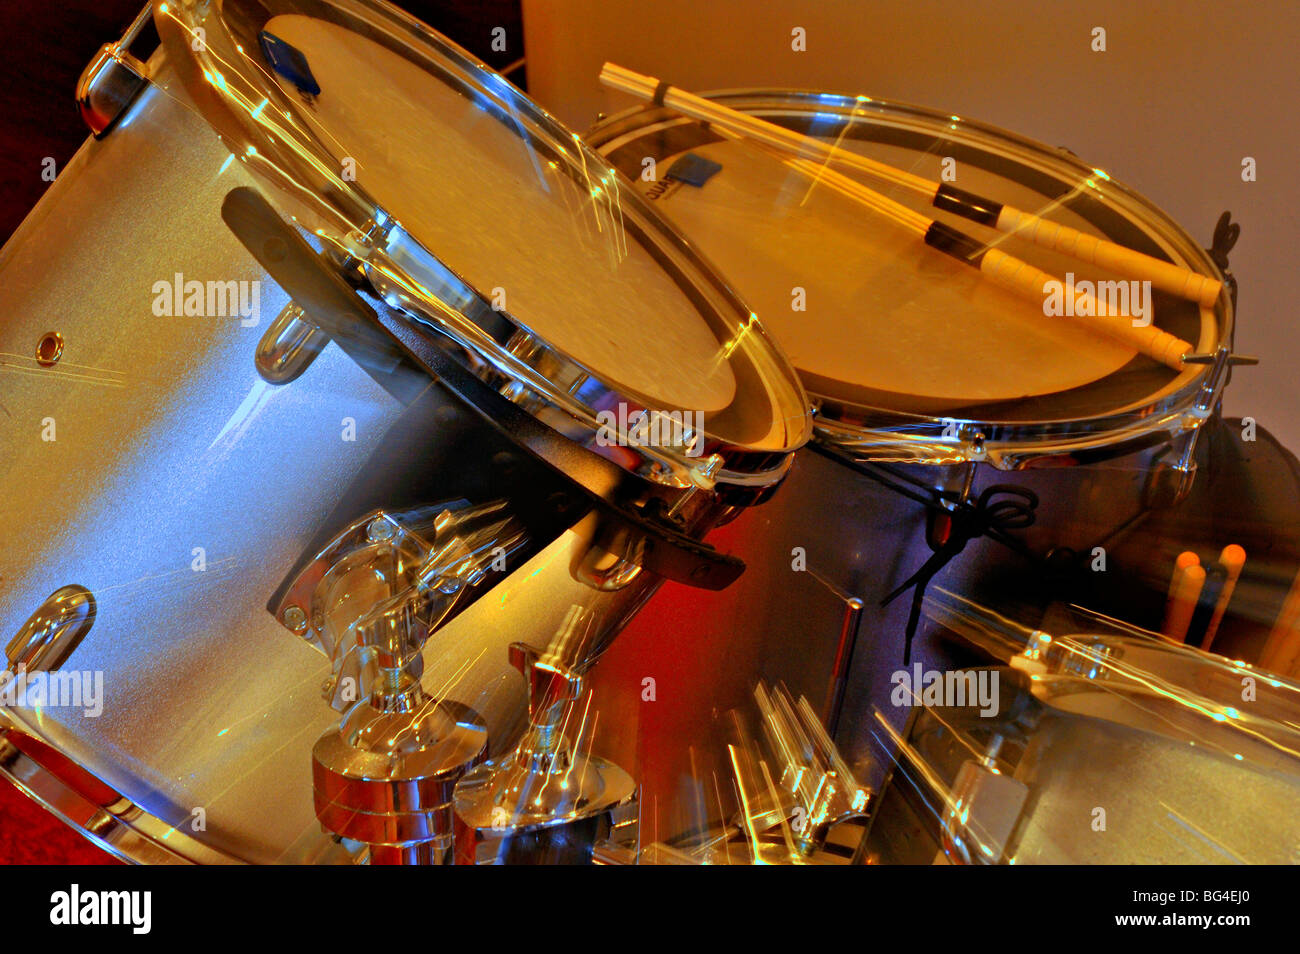 A conceptual blurred image of a drum set Stock Photo